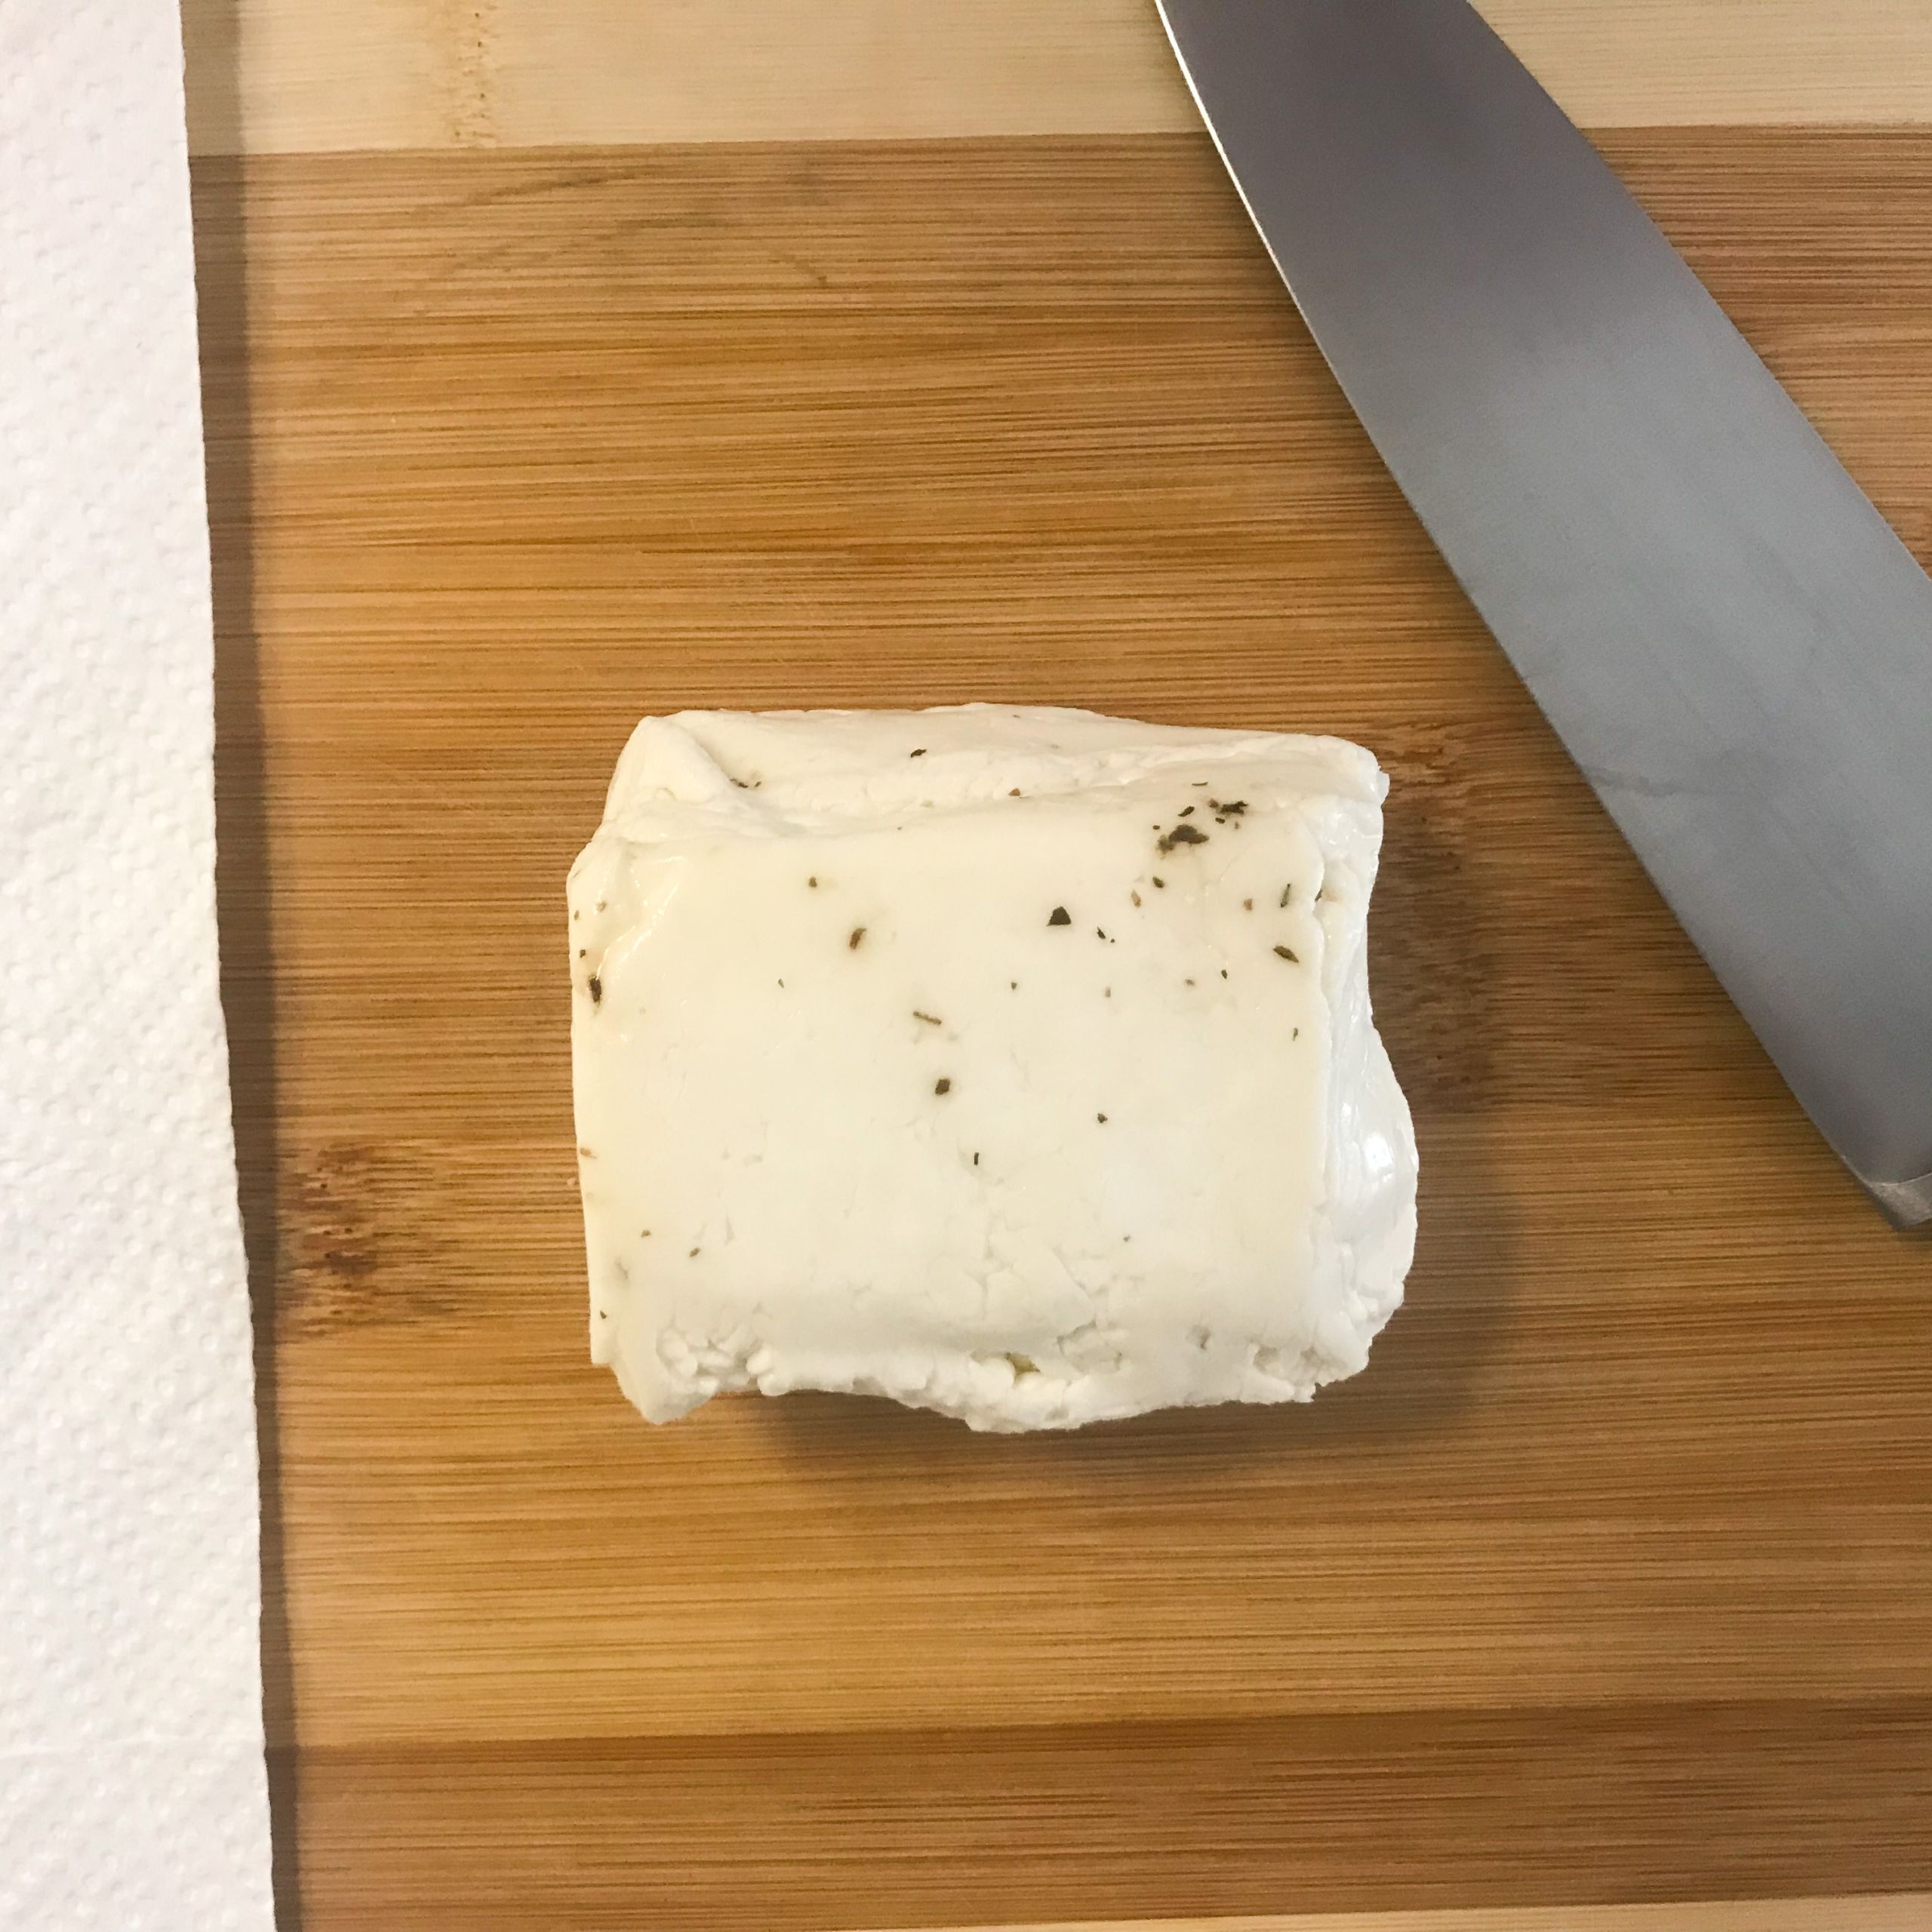 halloumi cheese and knife on cutting board